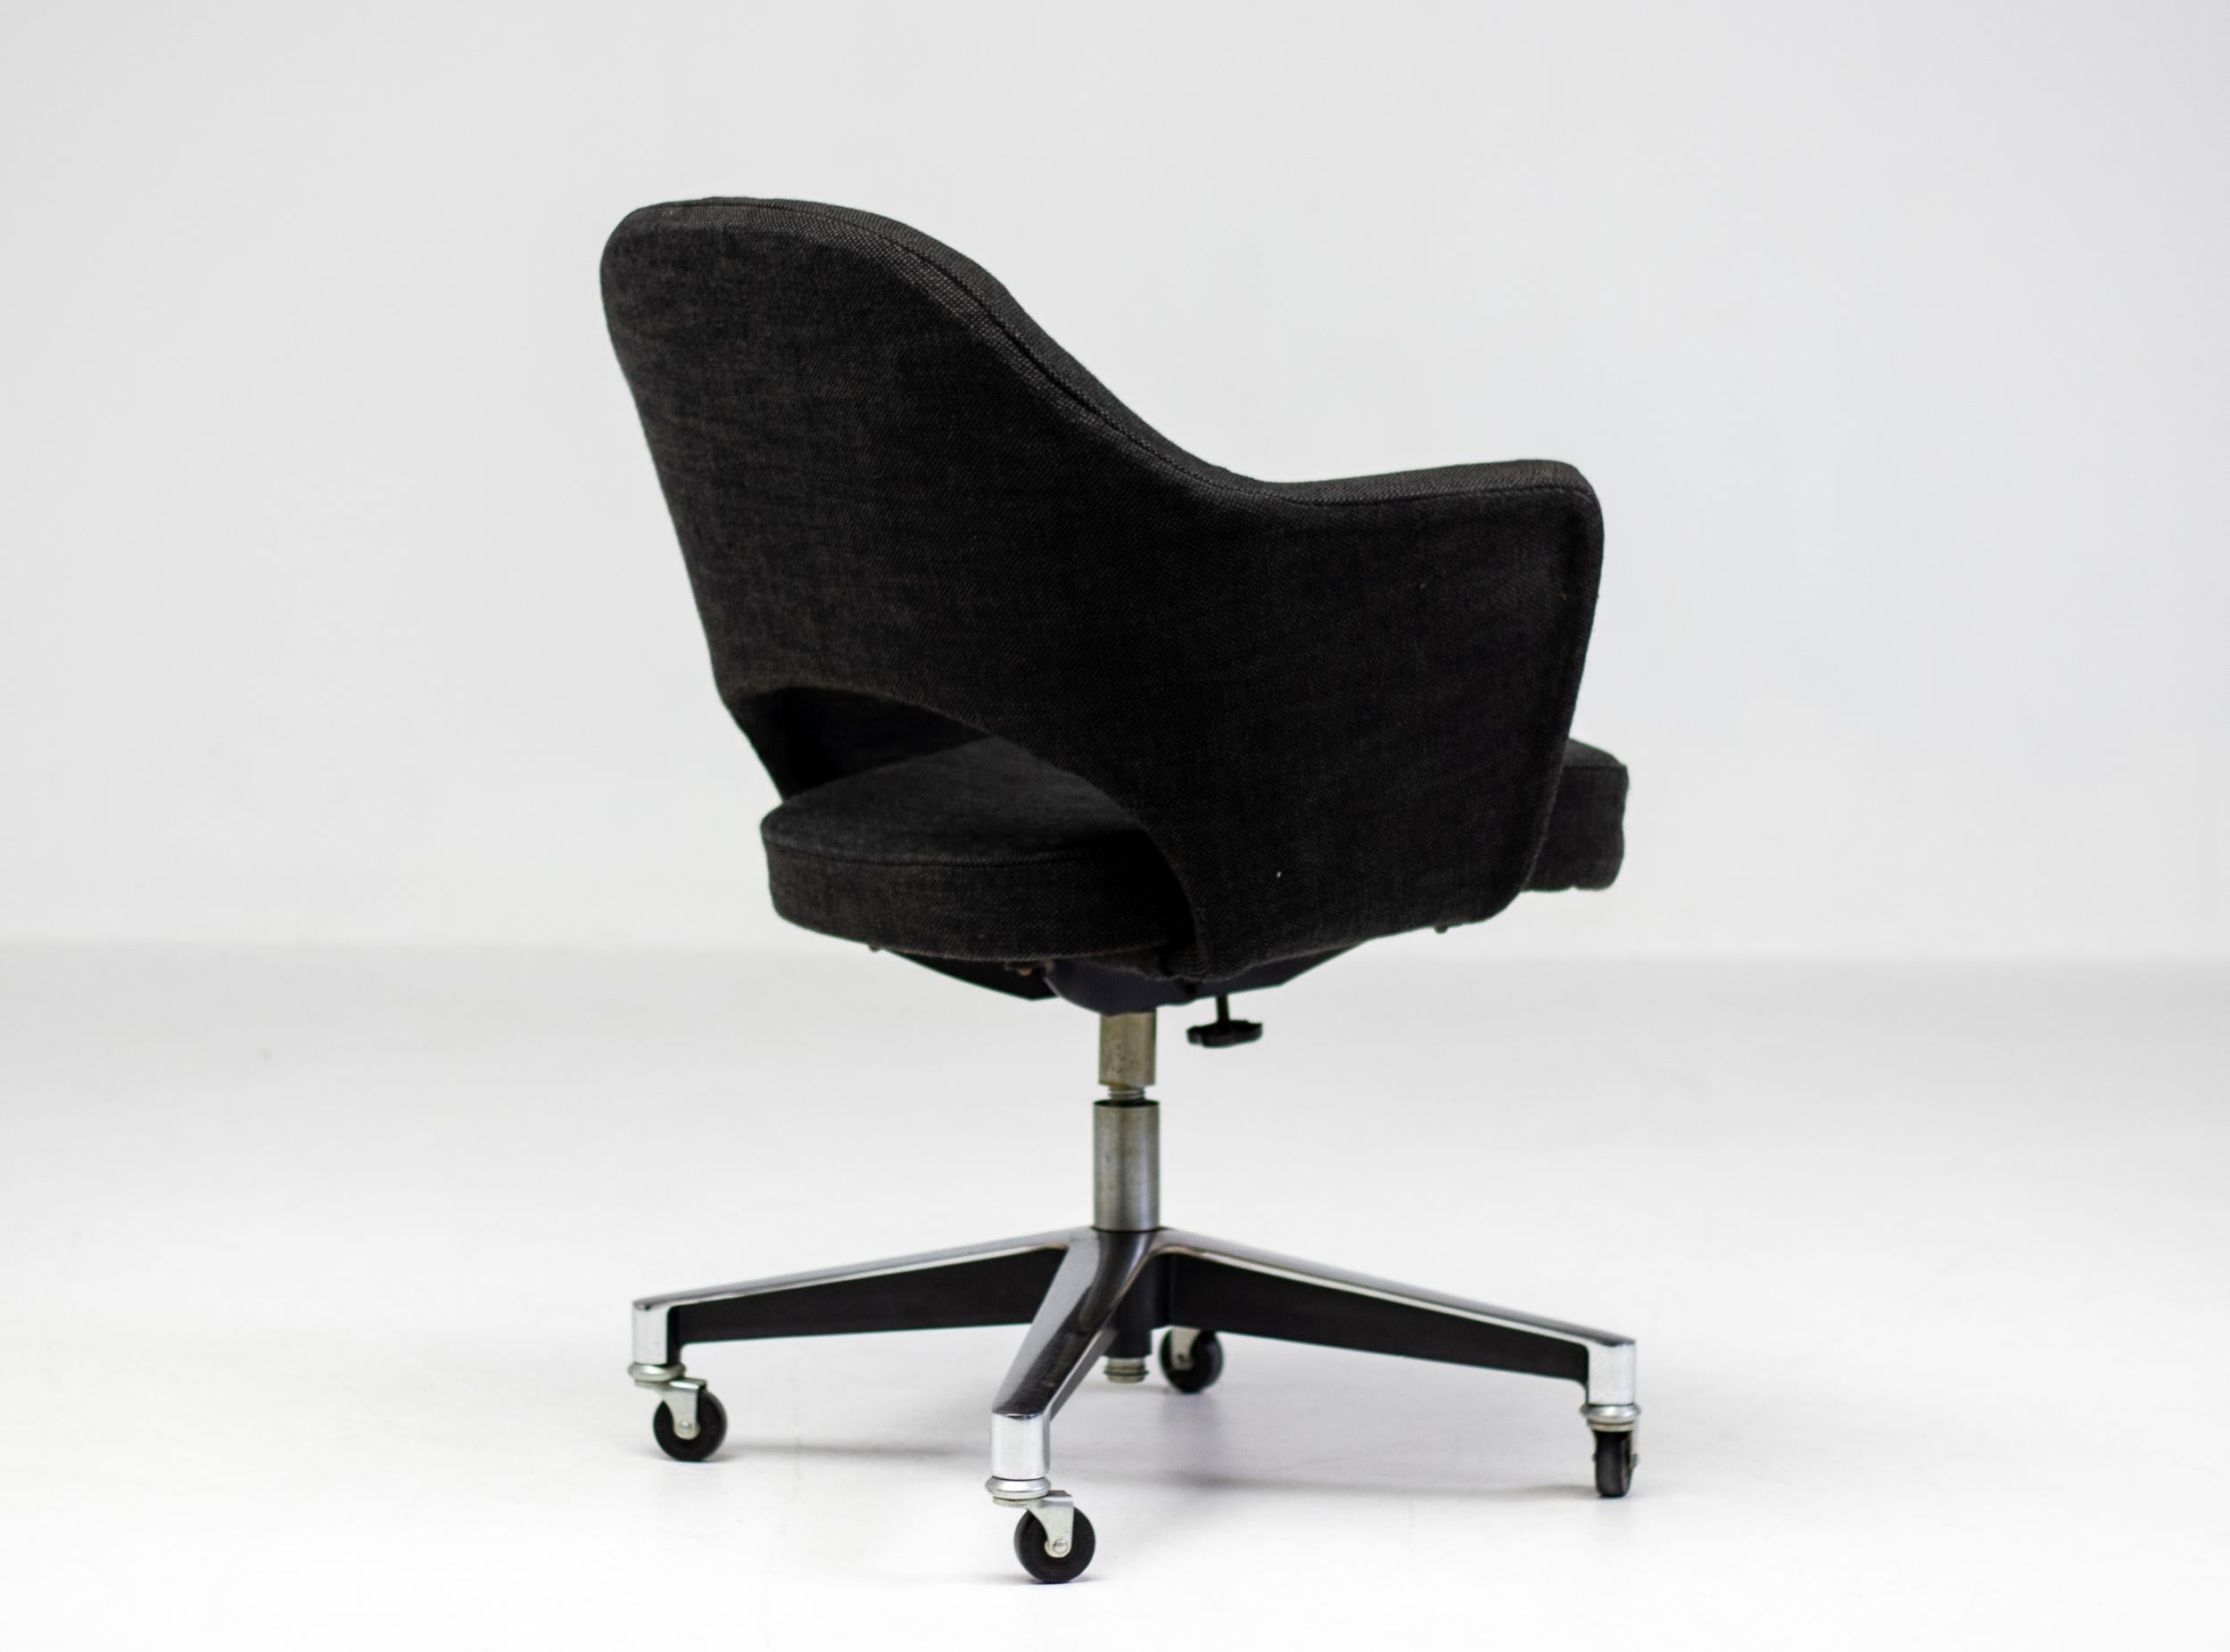 Early executive arm chair with rare height adjustability, tilt and swivel.  Designed in 1950 by Eero Saarinen for Knoll International. This example from the '50's, with the earliest tilt mechanism. 
All original, fully functional, the original dark